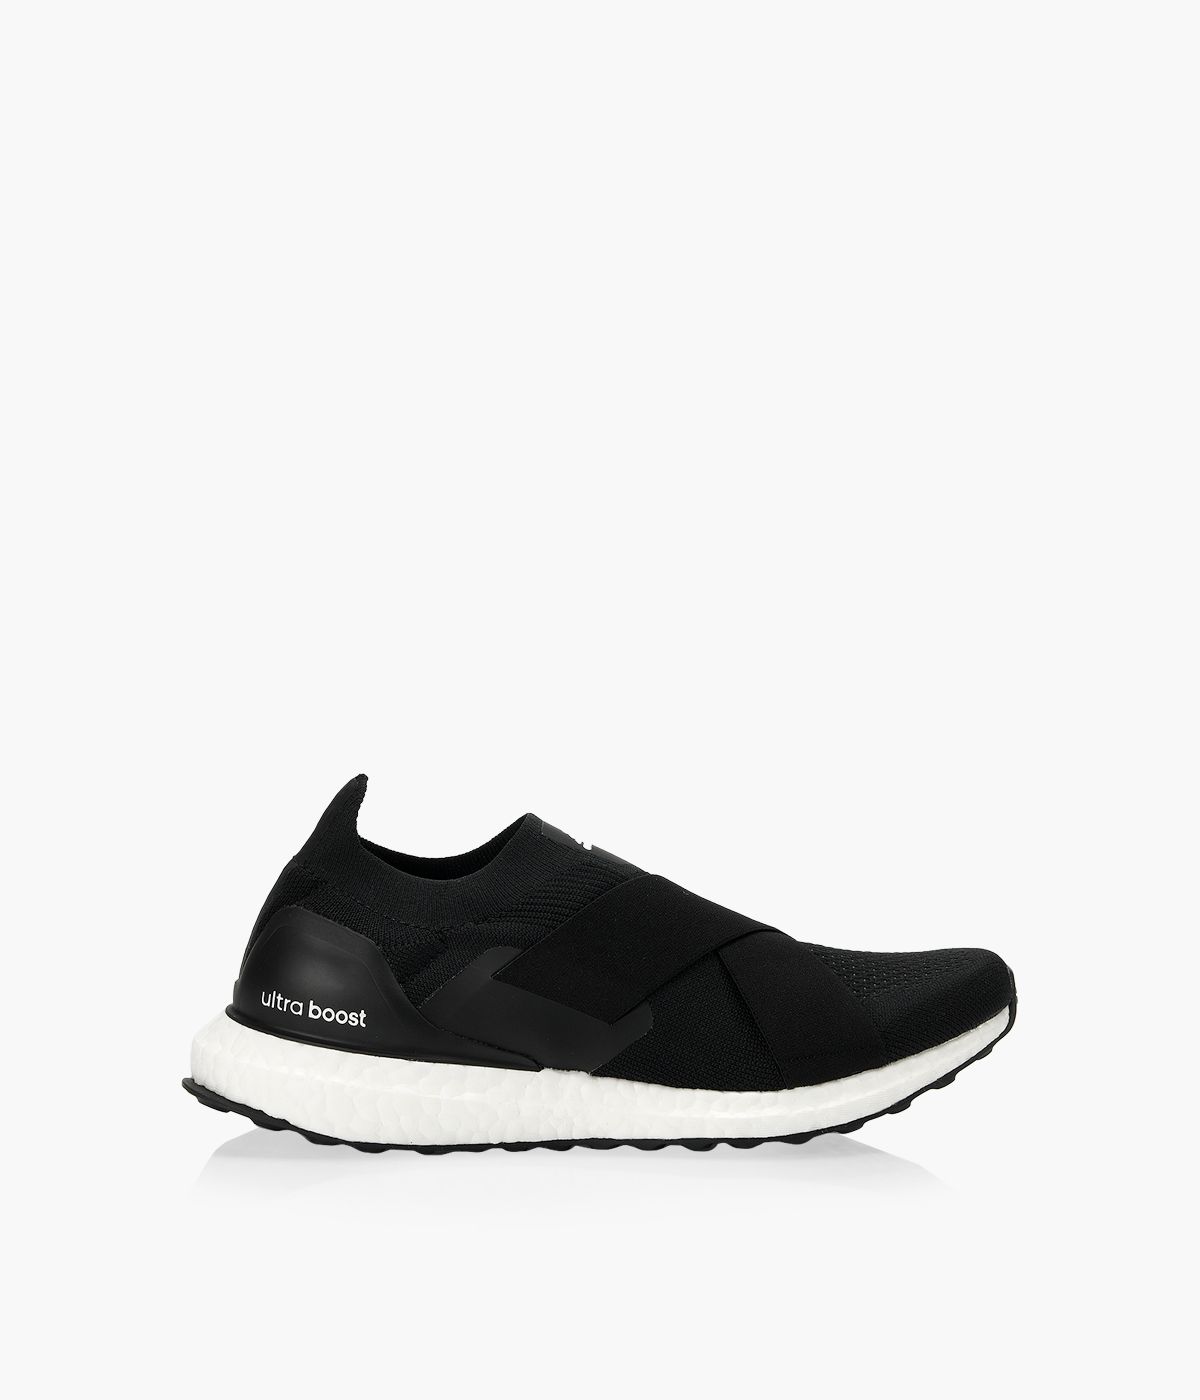 ADIDAS ULTRABOOST SLIP-ON DNA SHOES - Black Fabric | Browns Shoes